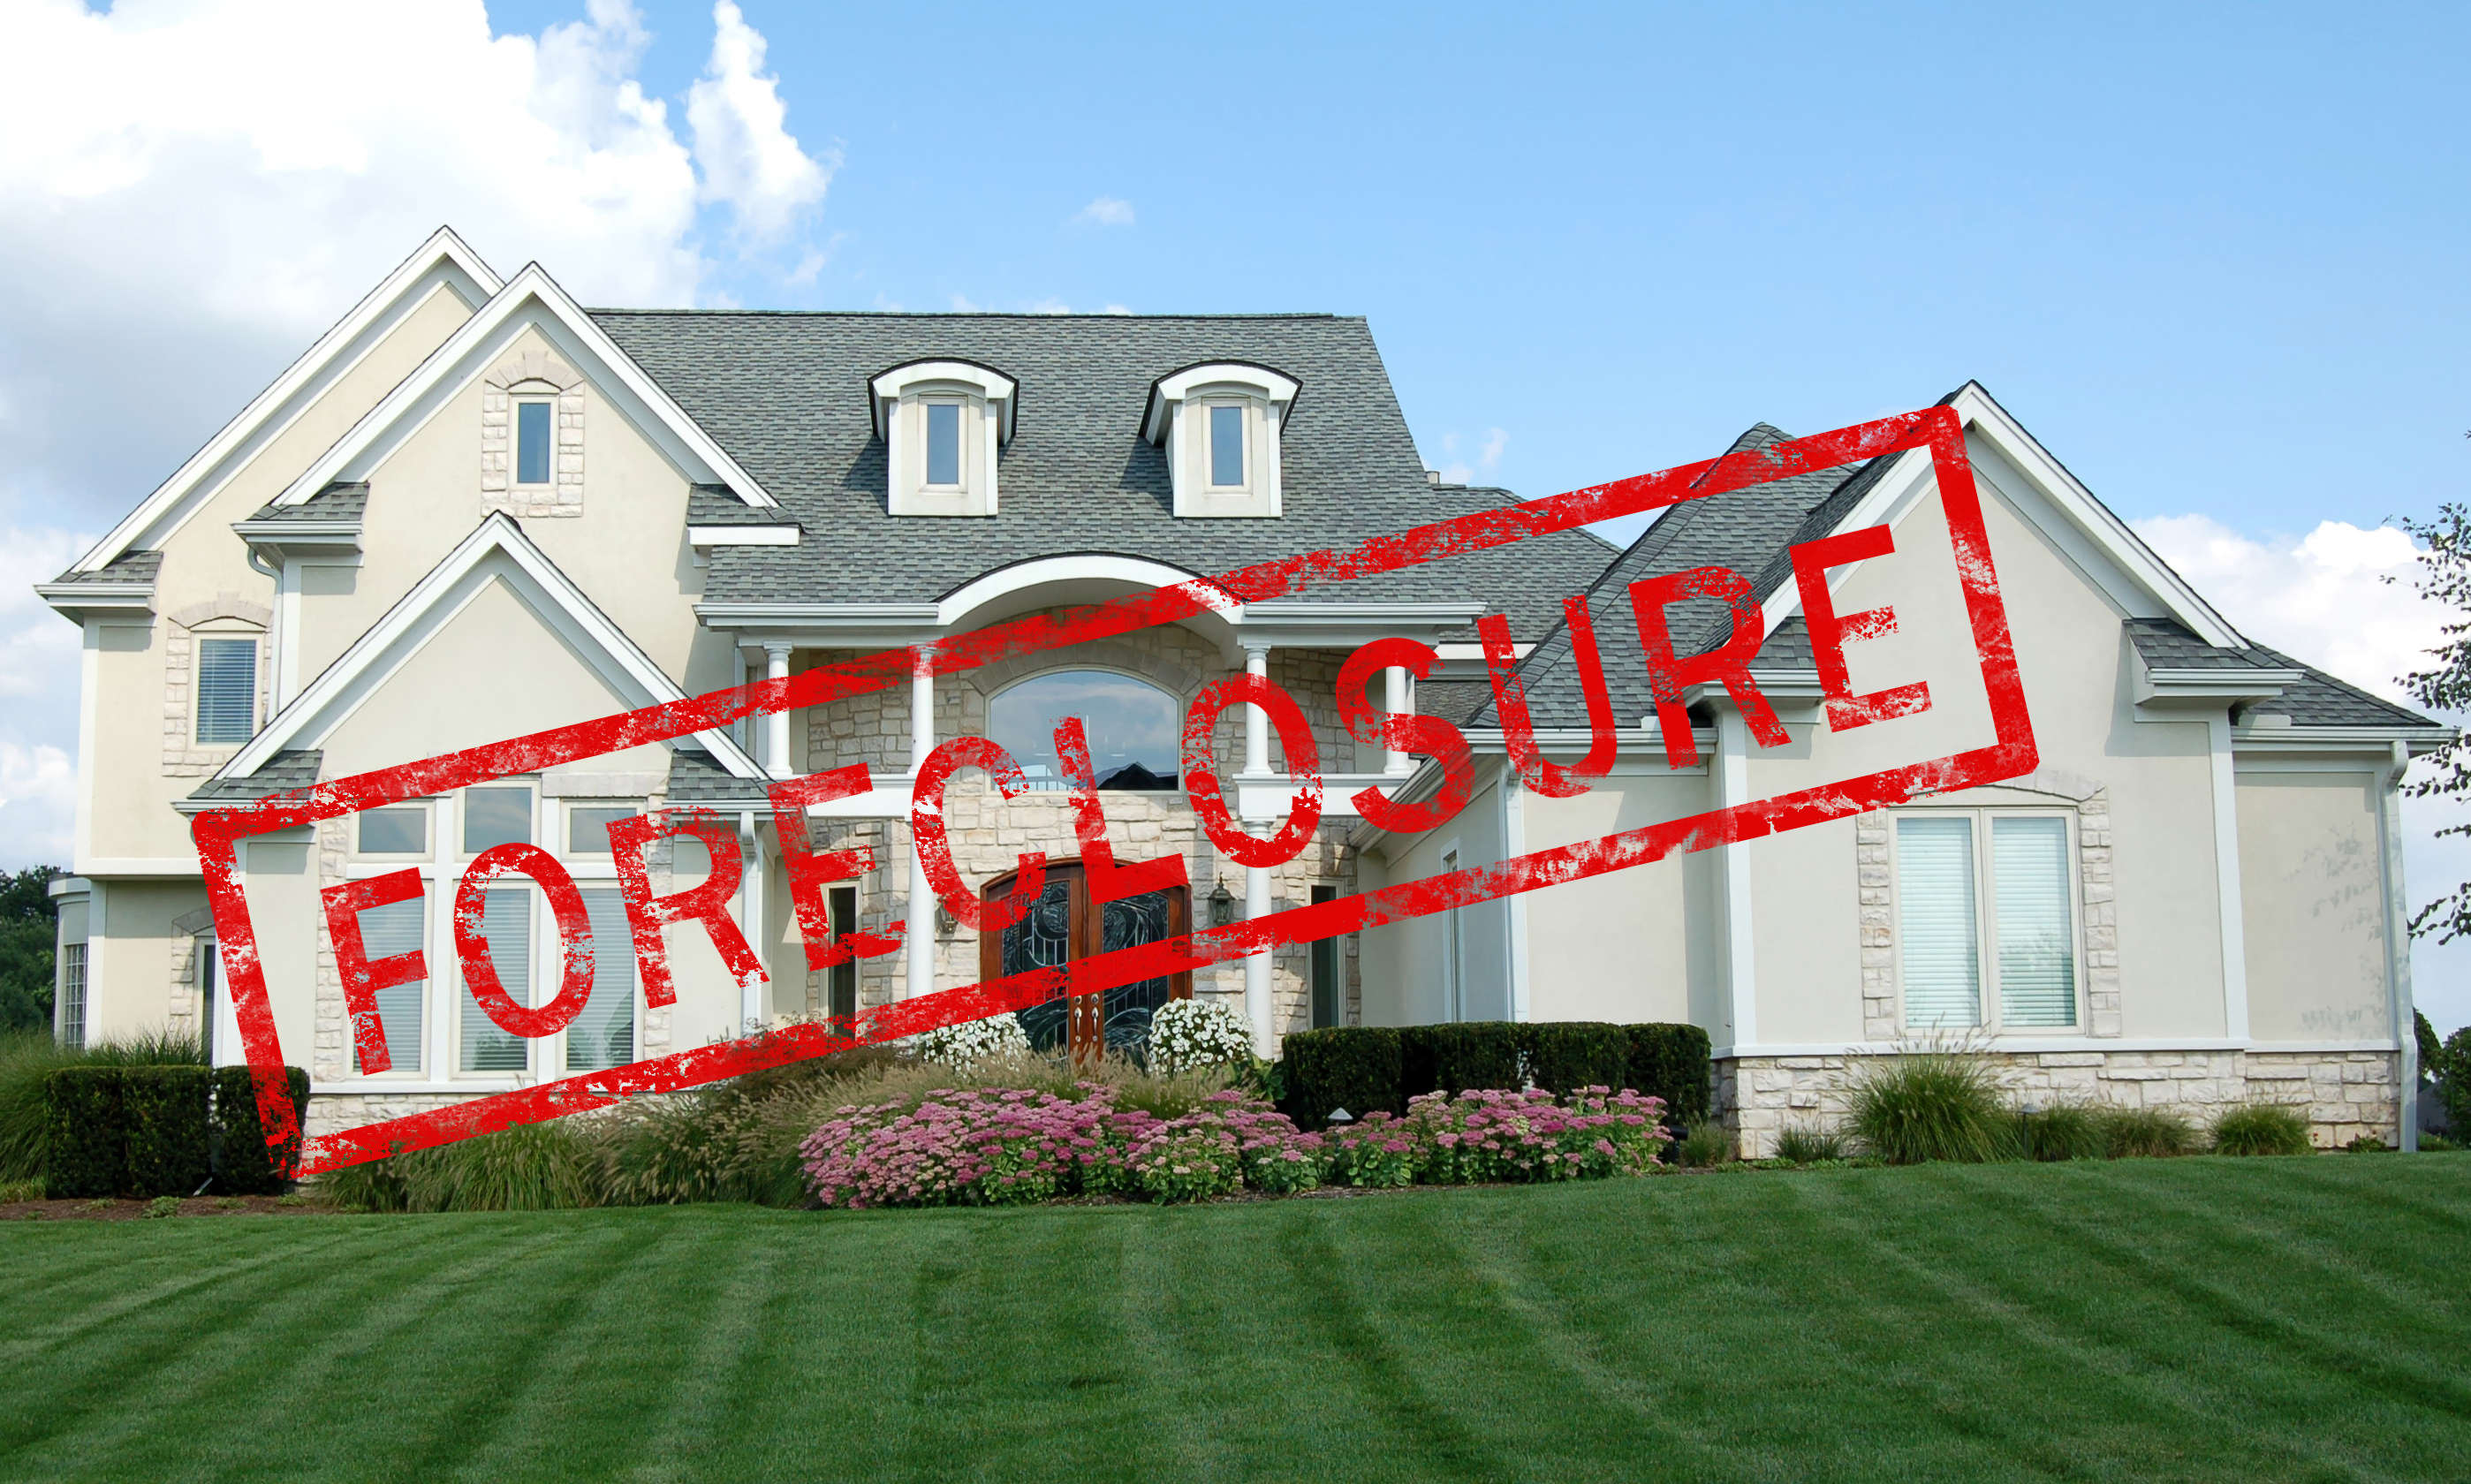 Call Lundquist Appraisals & Real Estate Services to discuss appraisals for Wabash foreclosures